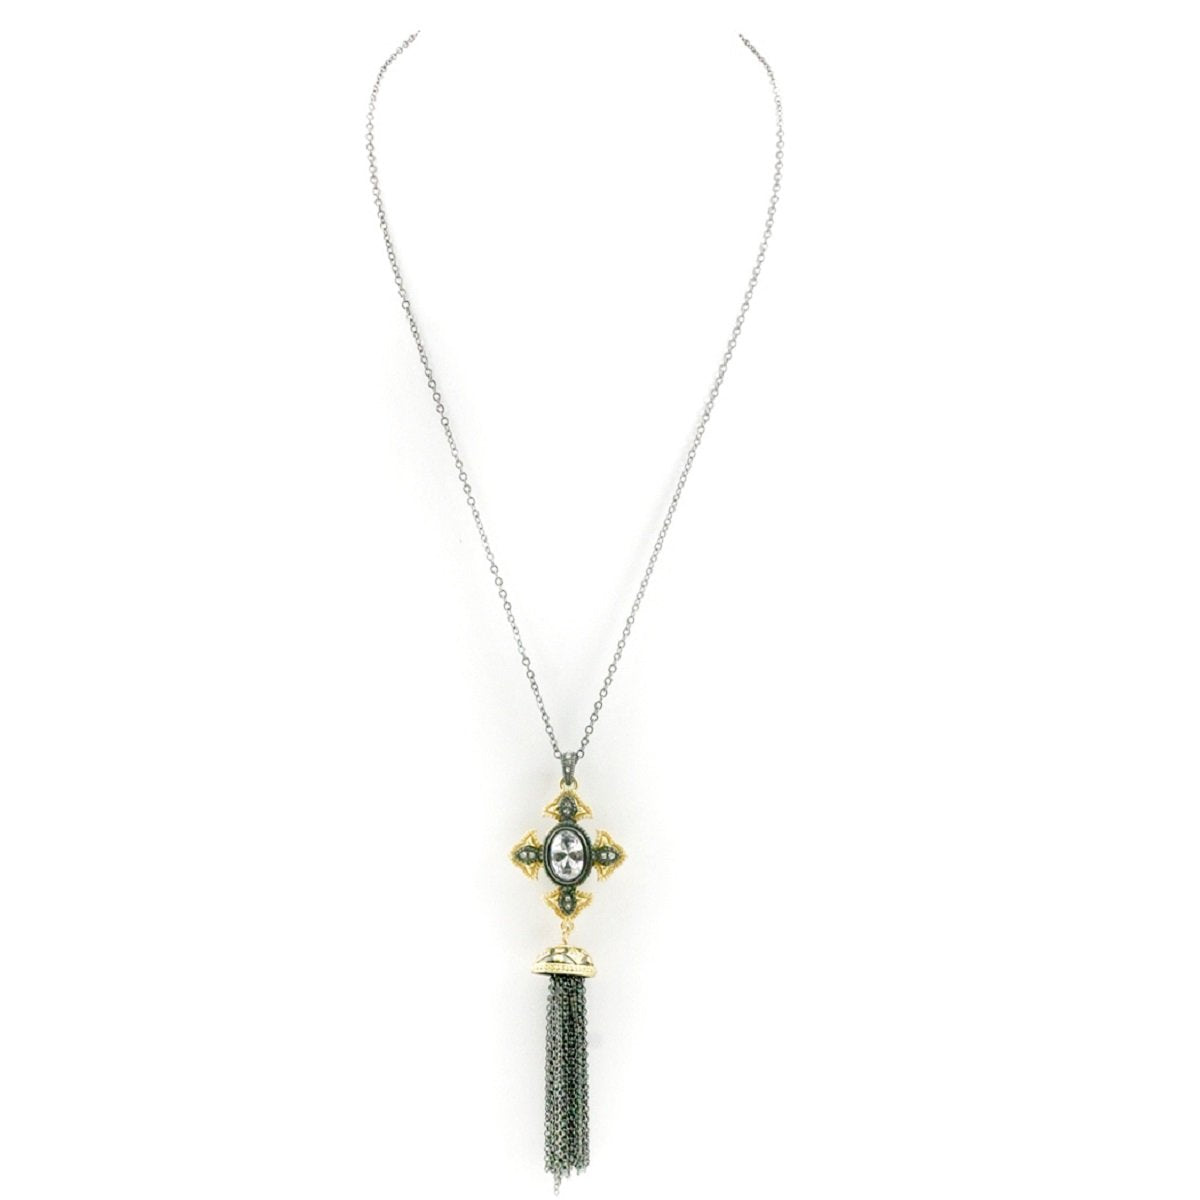 Vintage Tassel Black and Gold Cross Pendant With Oval Cut Cubic Zirconia Center Stone Micropaved With CZ on an Anchore Link Chain 500P2505